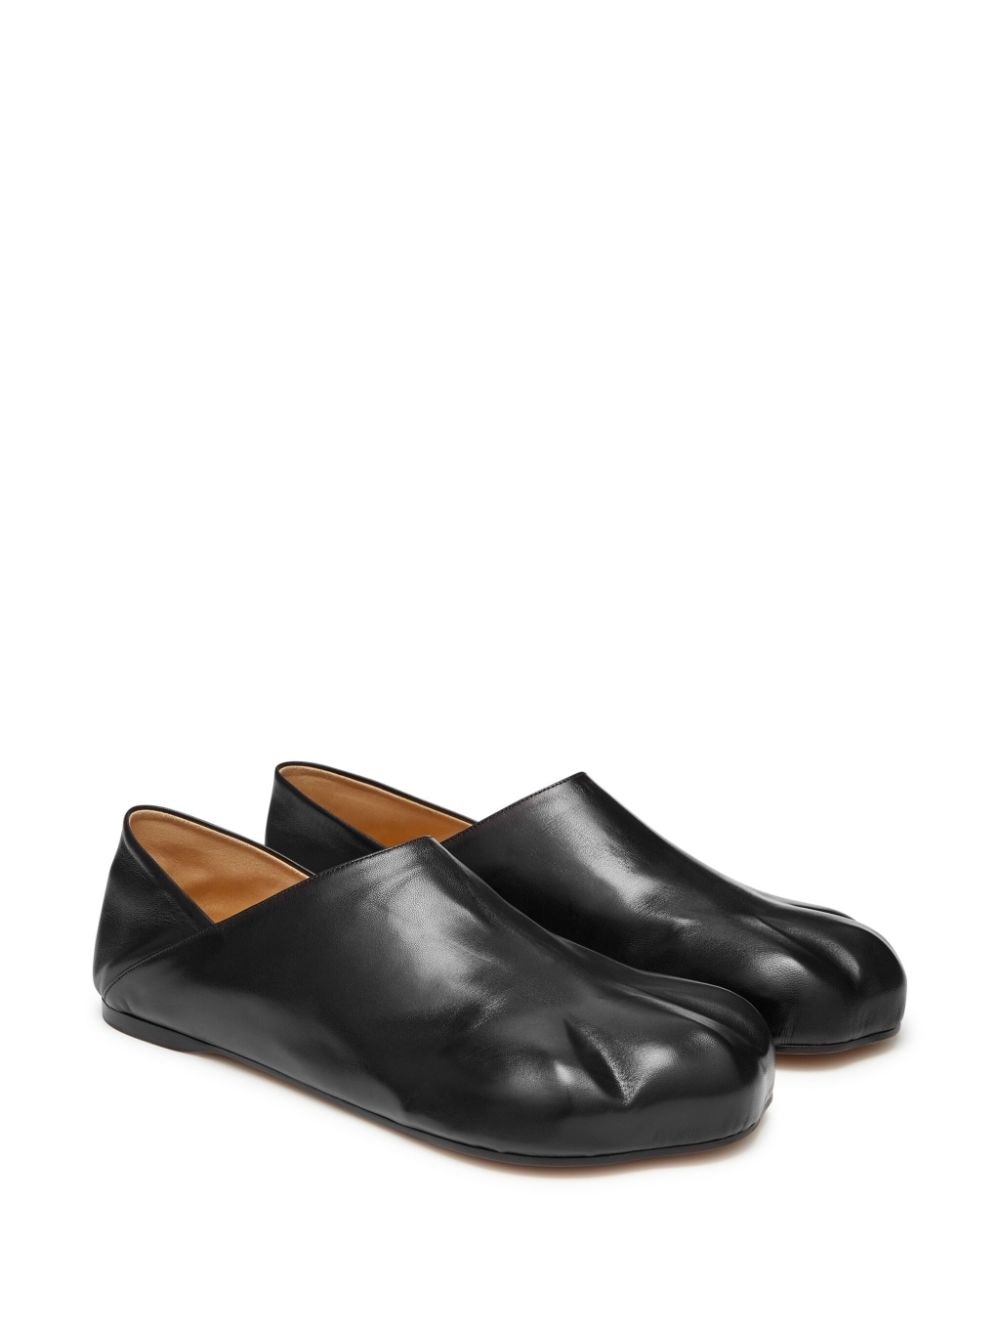 Paw leather loafers - 2